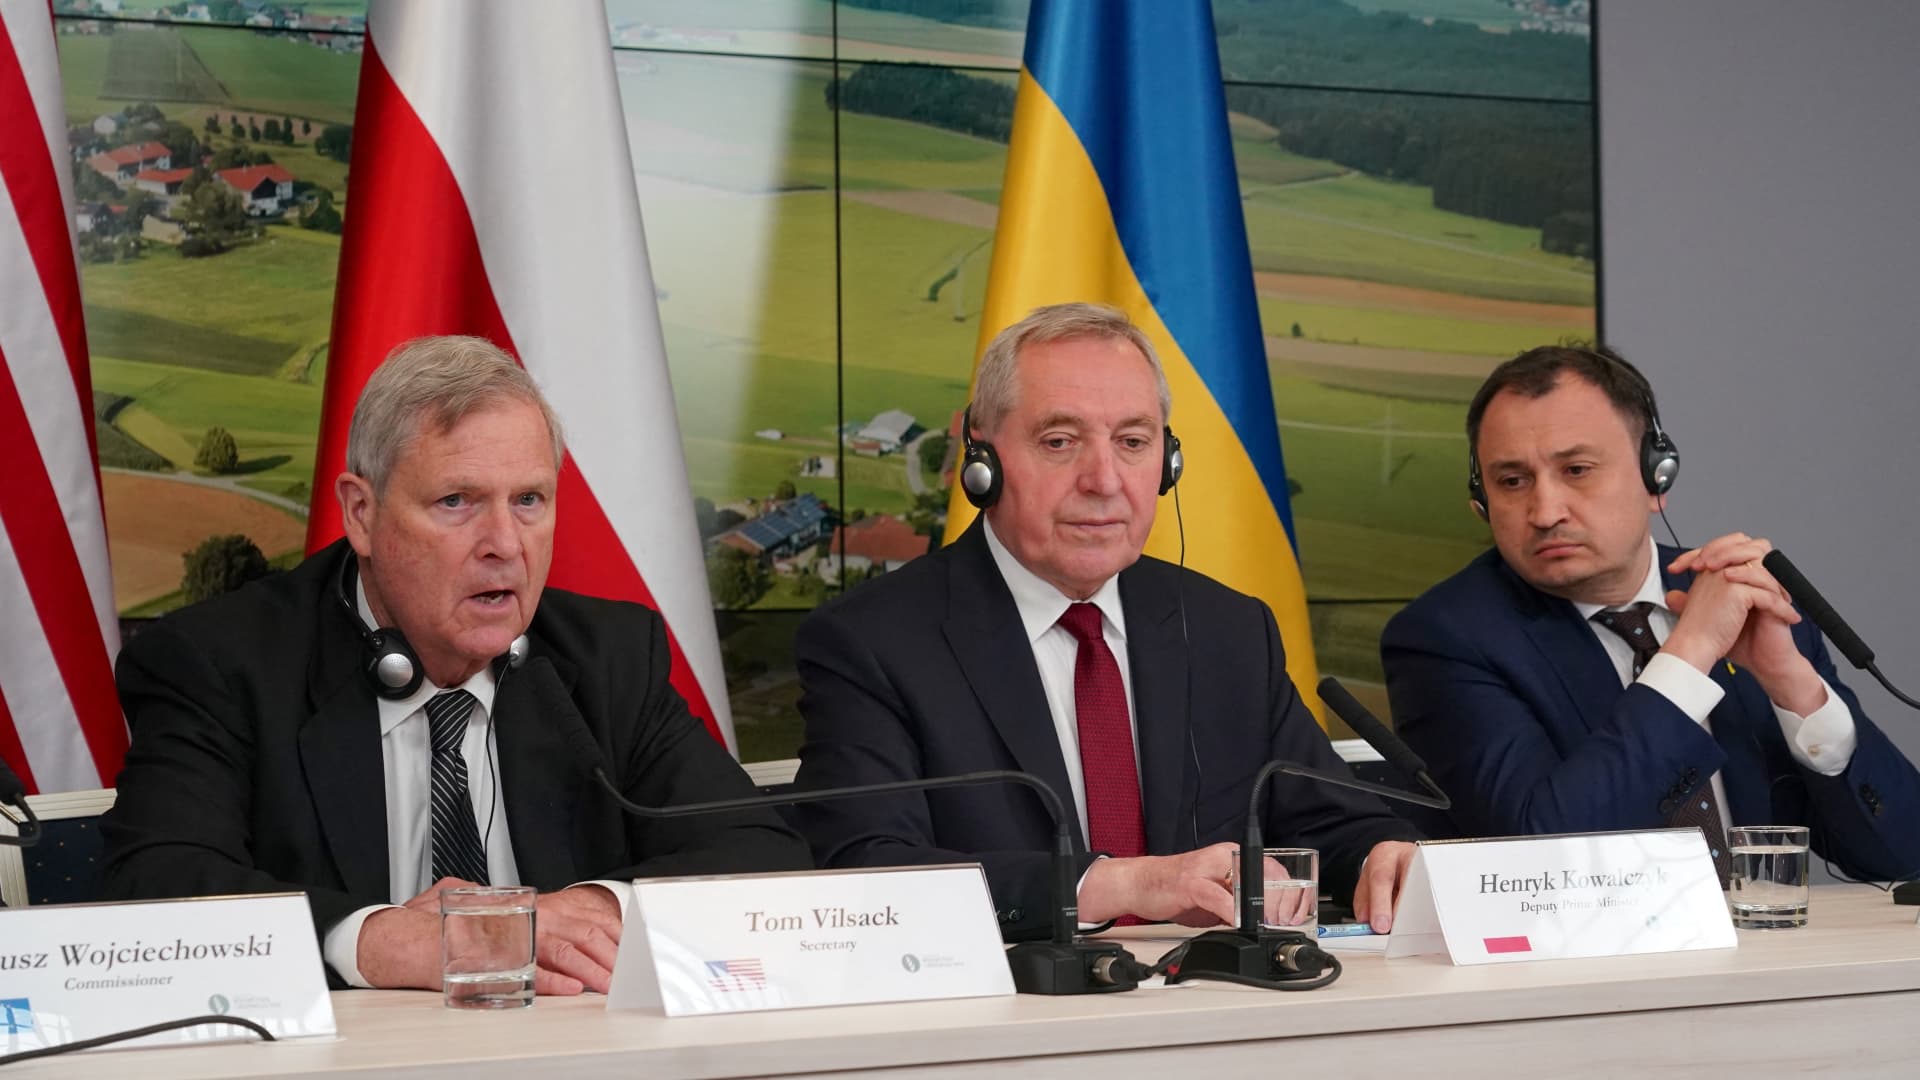 (L-R) US Secretary of Agriculture Tom Vilsack, Polish Minister of Agriculture Henryk Kowalczyk and Ukrainian Minister of Agriculture Mykola Solskyi hold a joint press briefing in Warsaw on May 16, 2022.